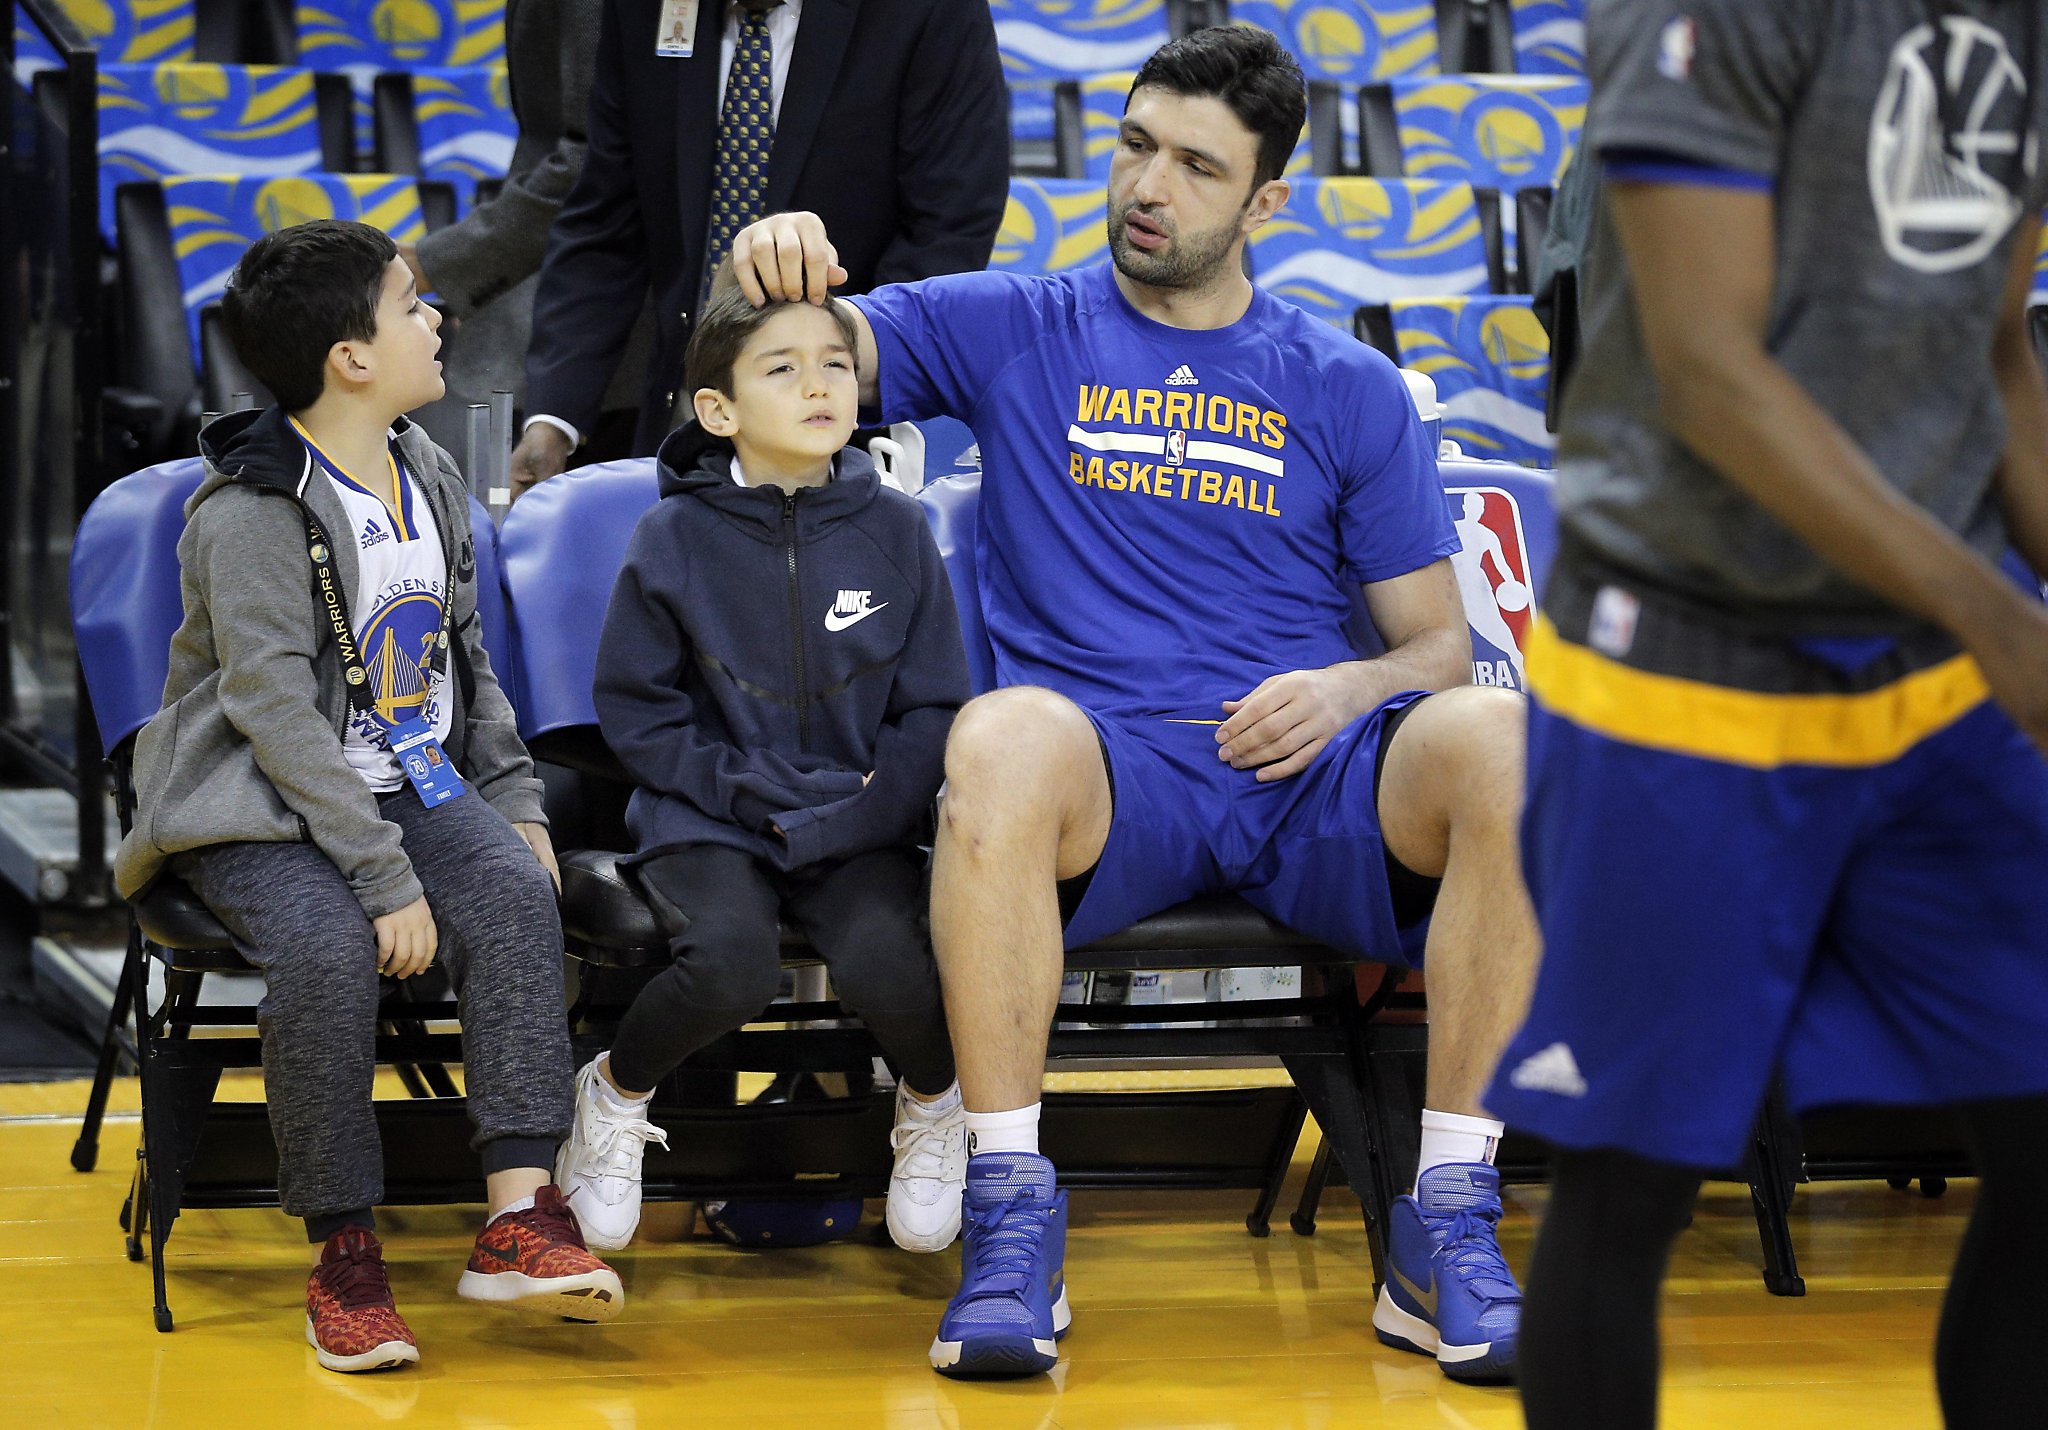 Zaza joked he was going to FedEx his kids home if the Warriors didn't stop losing on the road - Darien Times